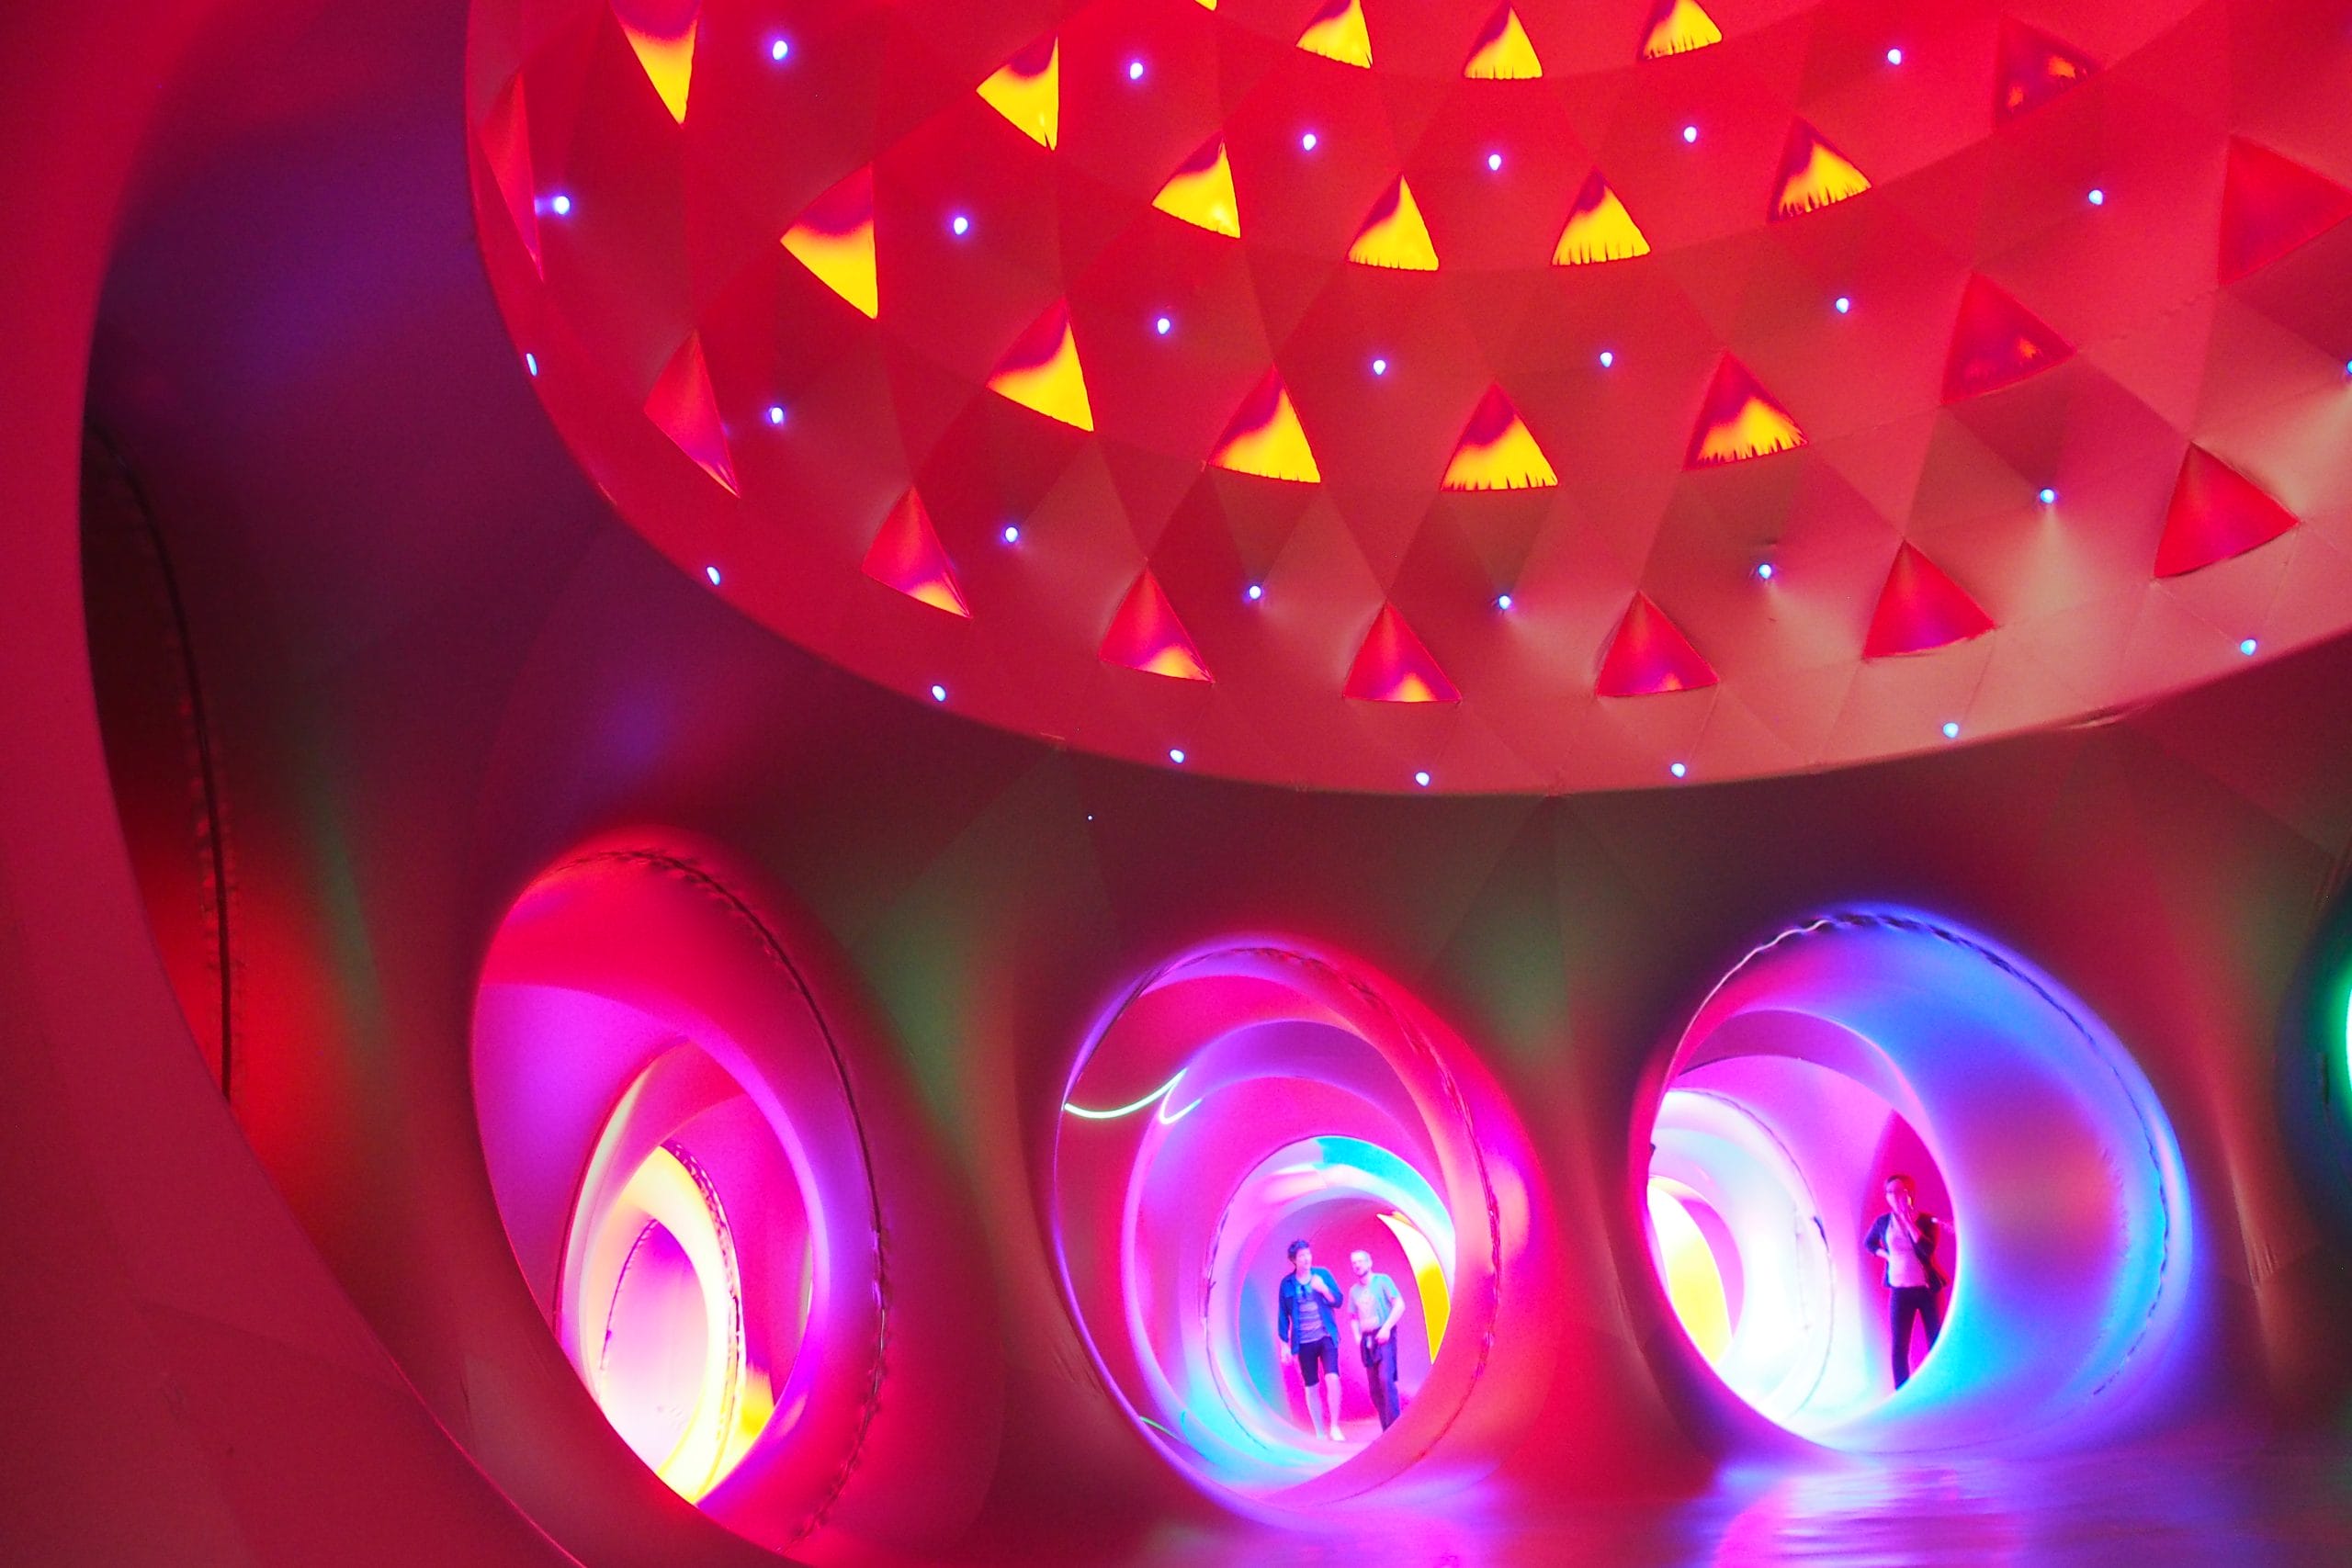 A larger dome within the Katena luminarium with geometric shapes in the domed roof. Predominently red, tunnels branching off from the dome are purple and blue. People explore the tunnels in the background.